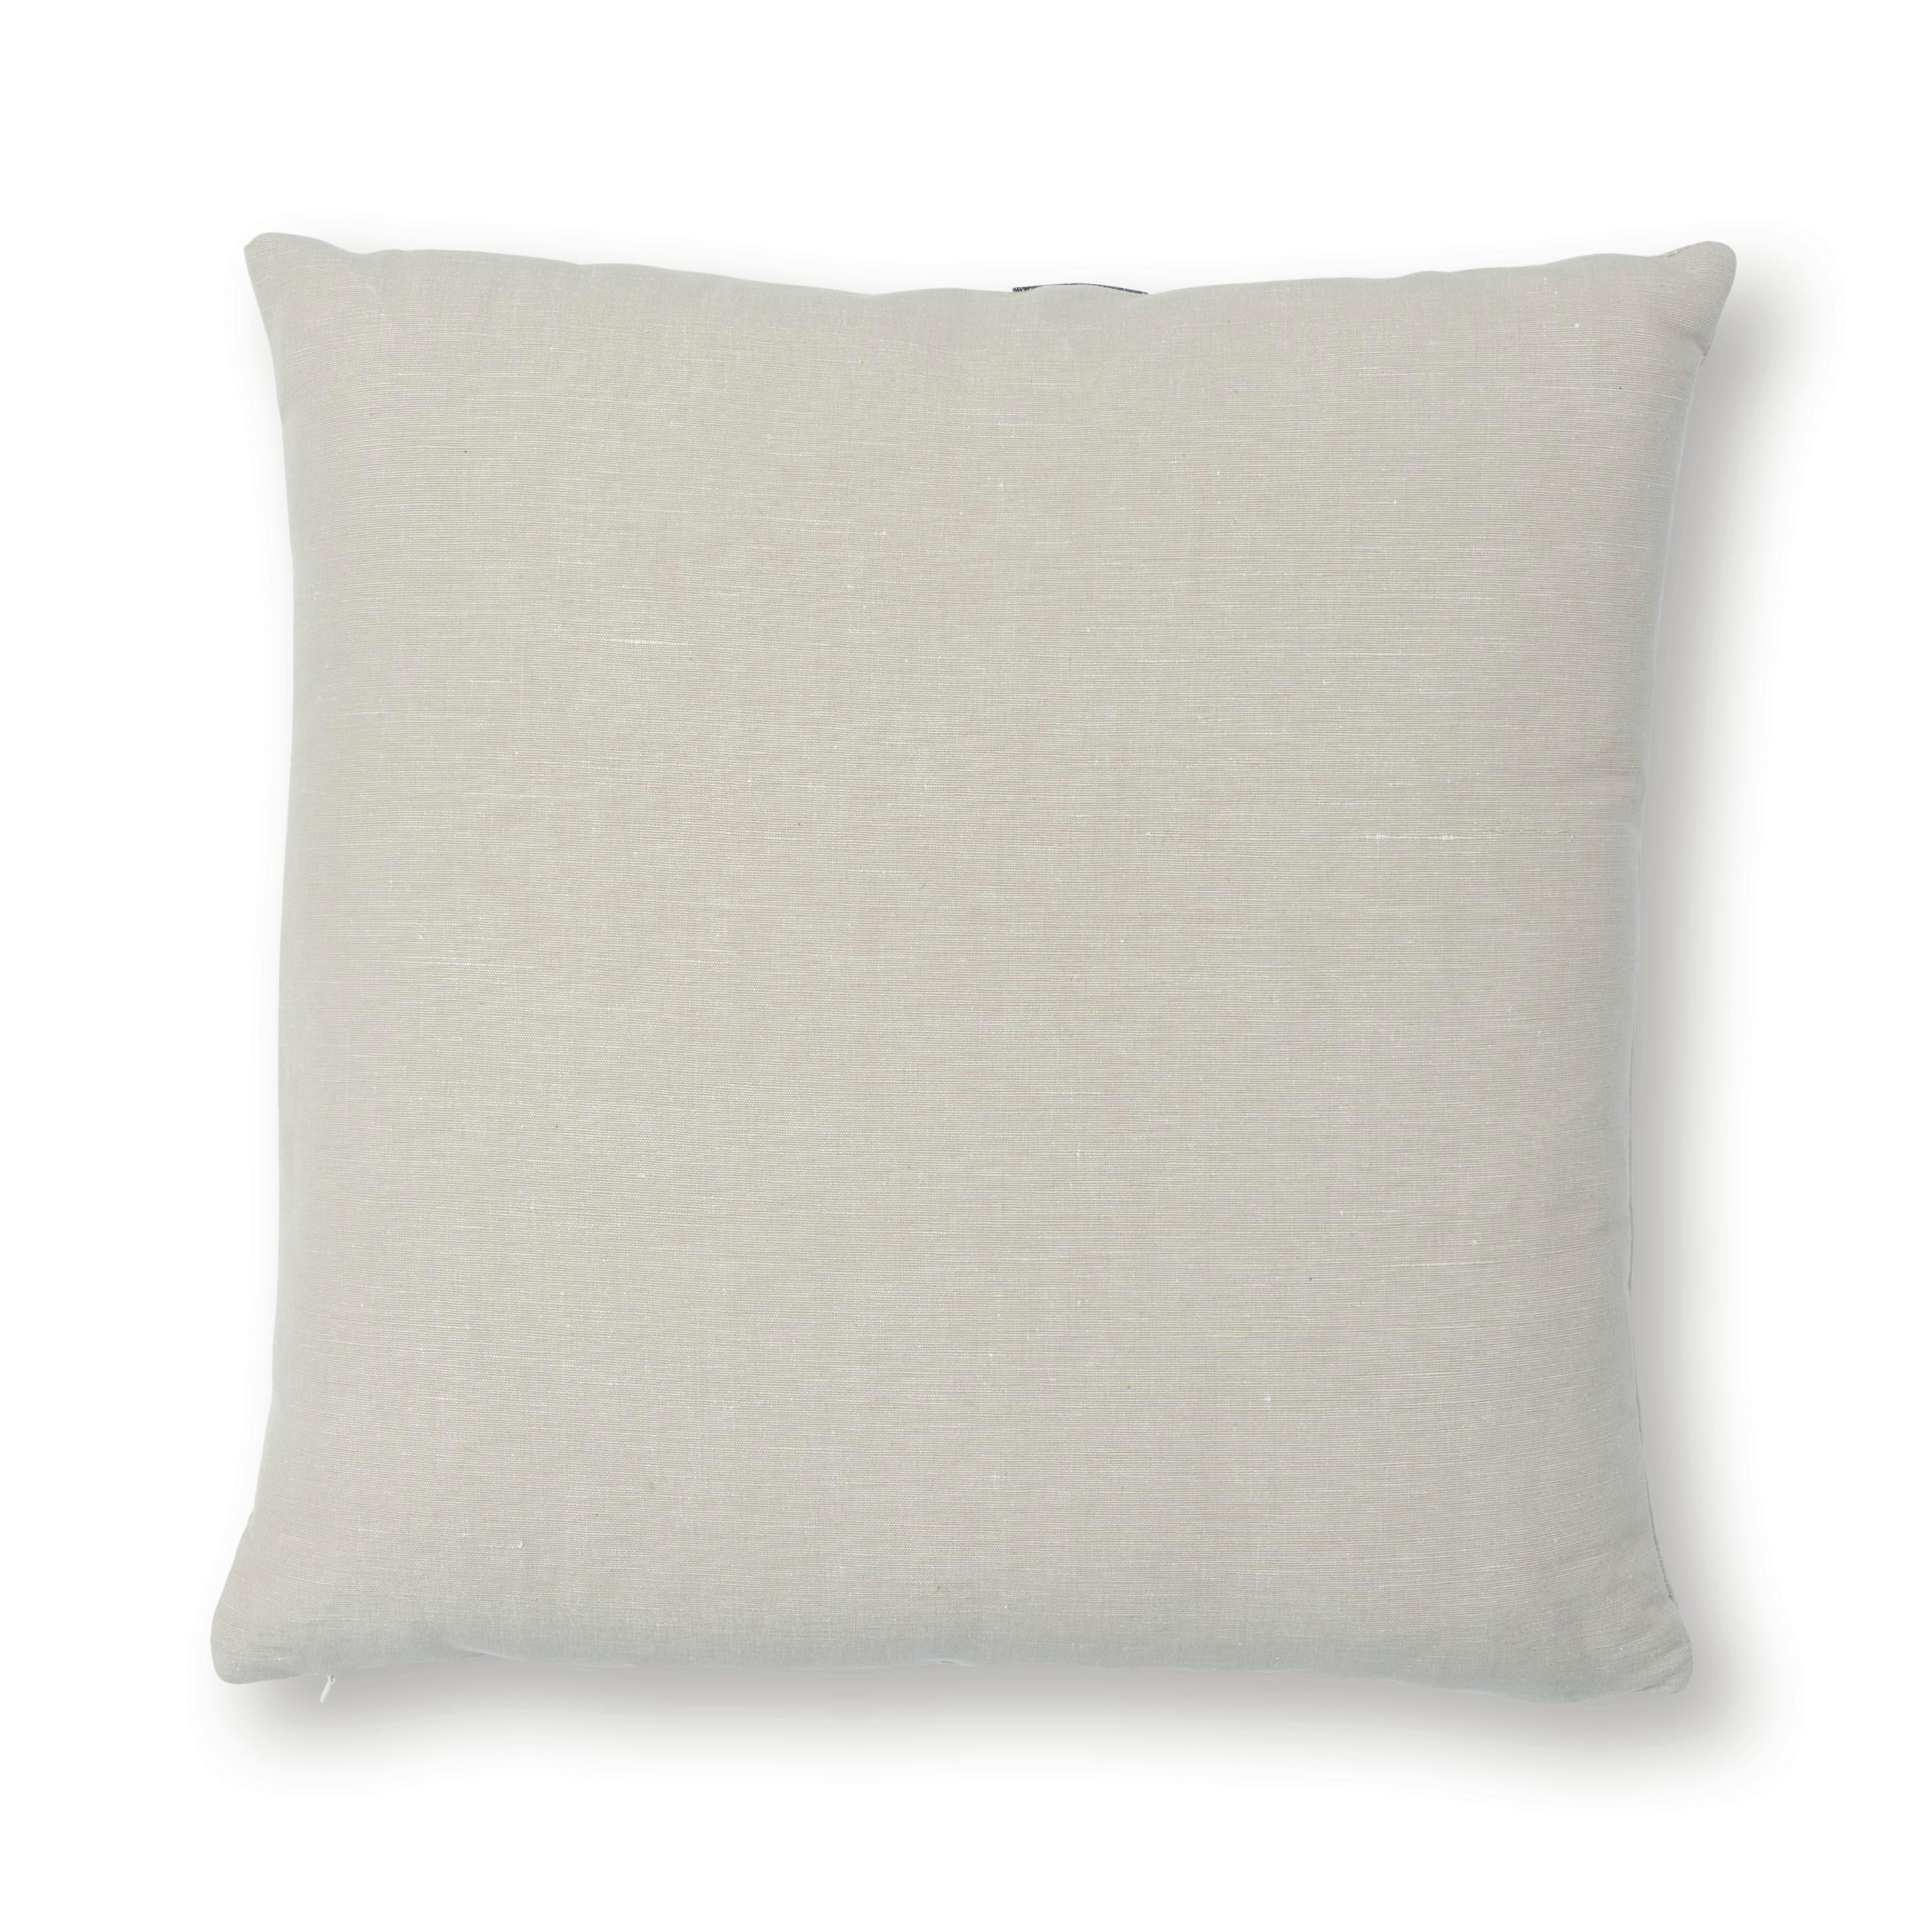 This pillow features Lollaland Linen Stripe with a knife edge finish. This asymmetrical, full-width woven stripe just begs for a variety of chic applications! Pillow includes a feather/down fill insert and hidden zipper closure.    

*If out of